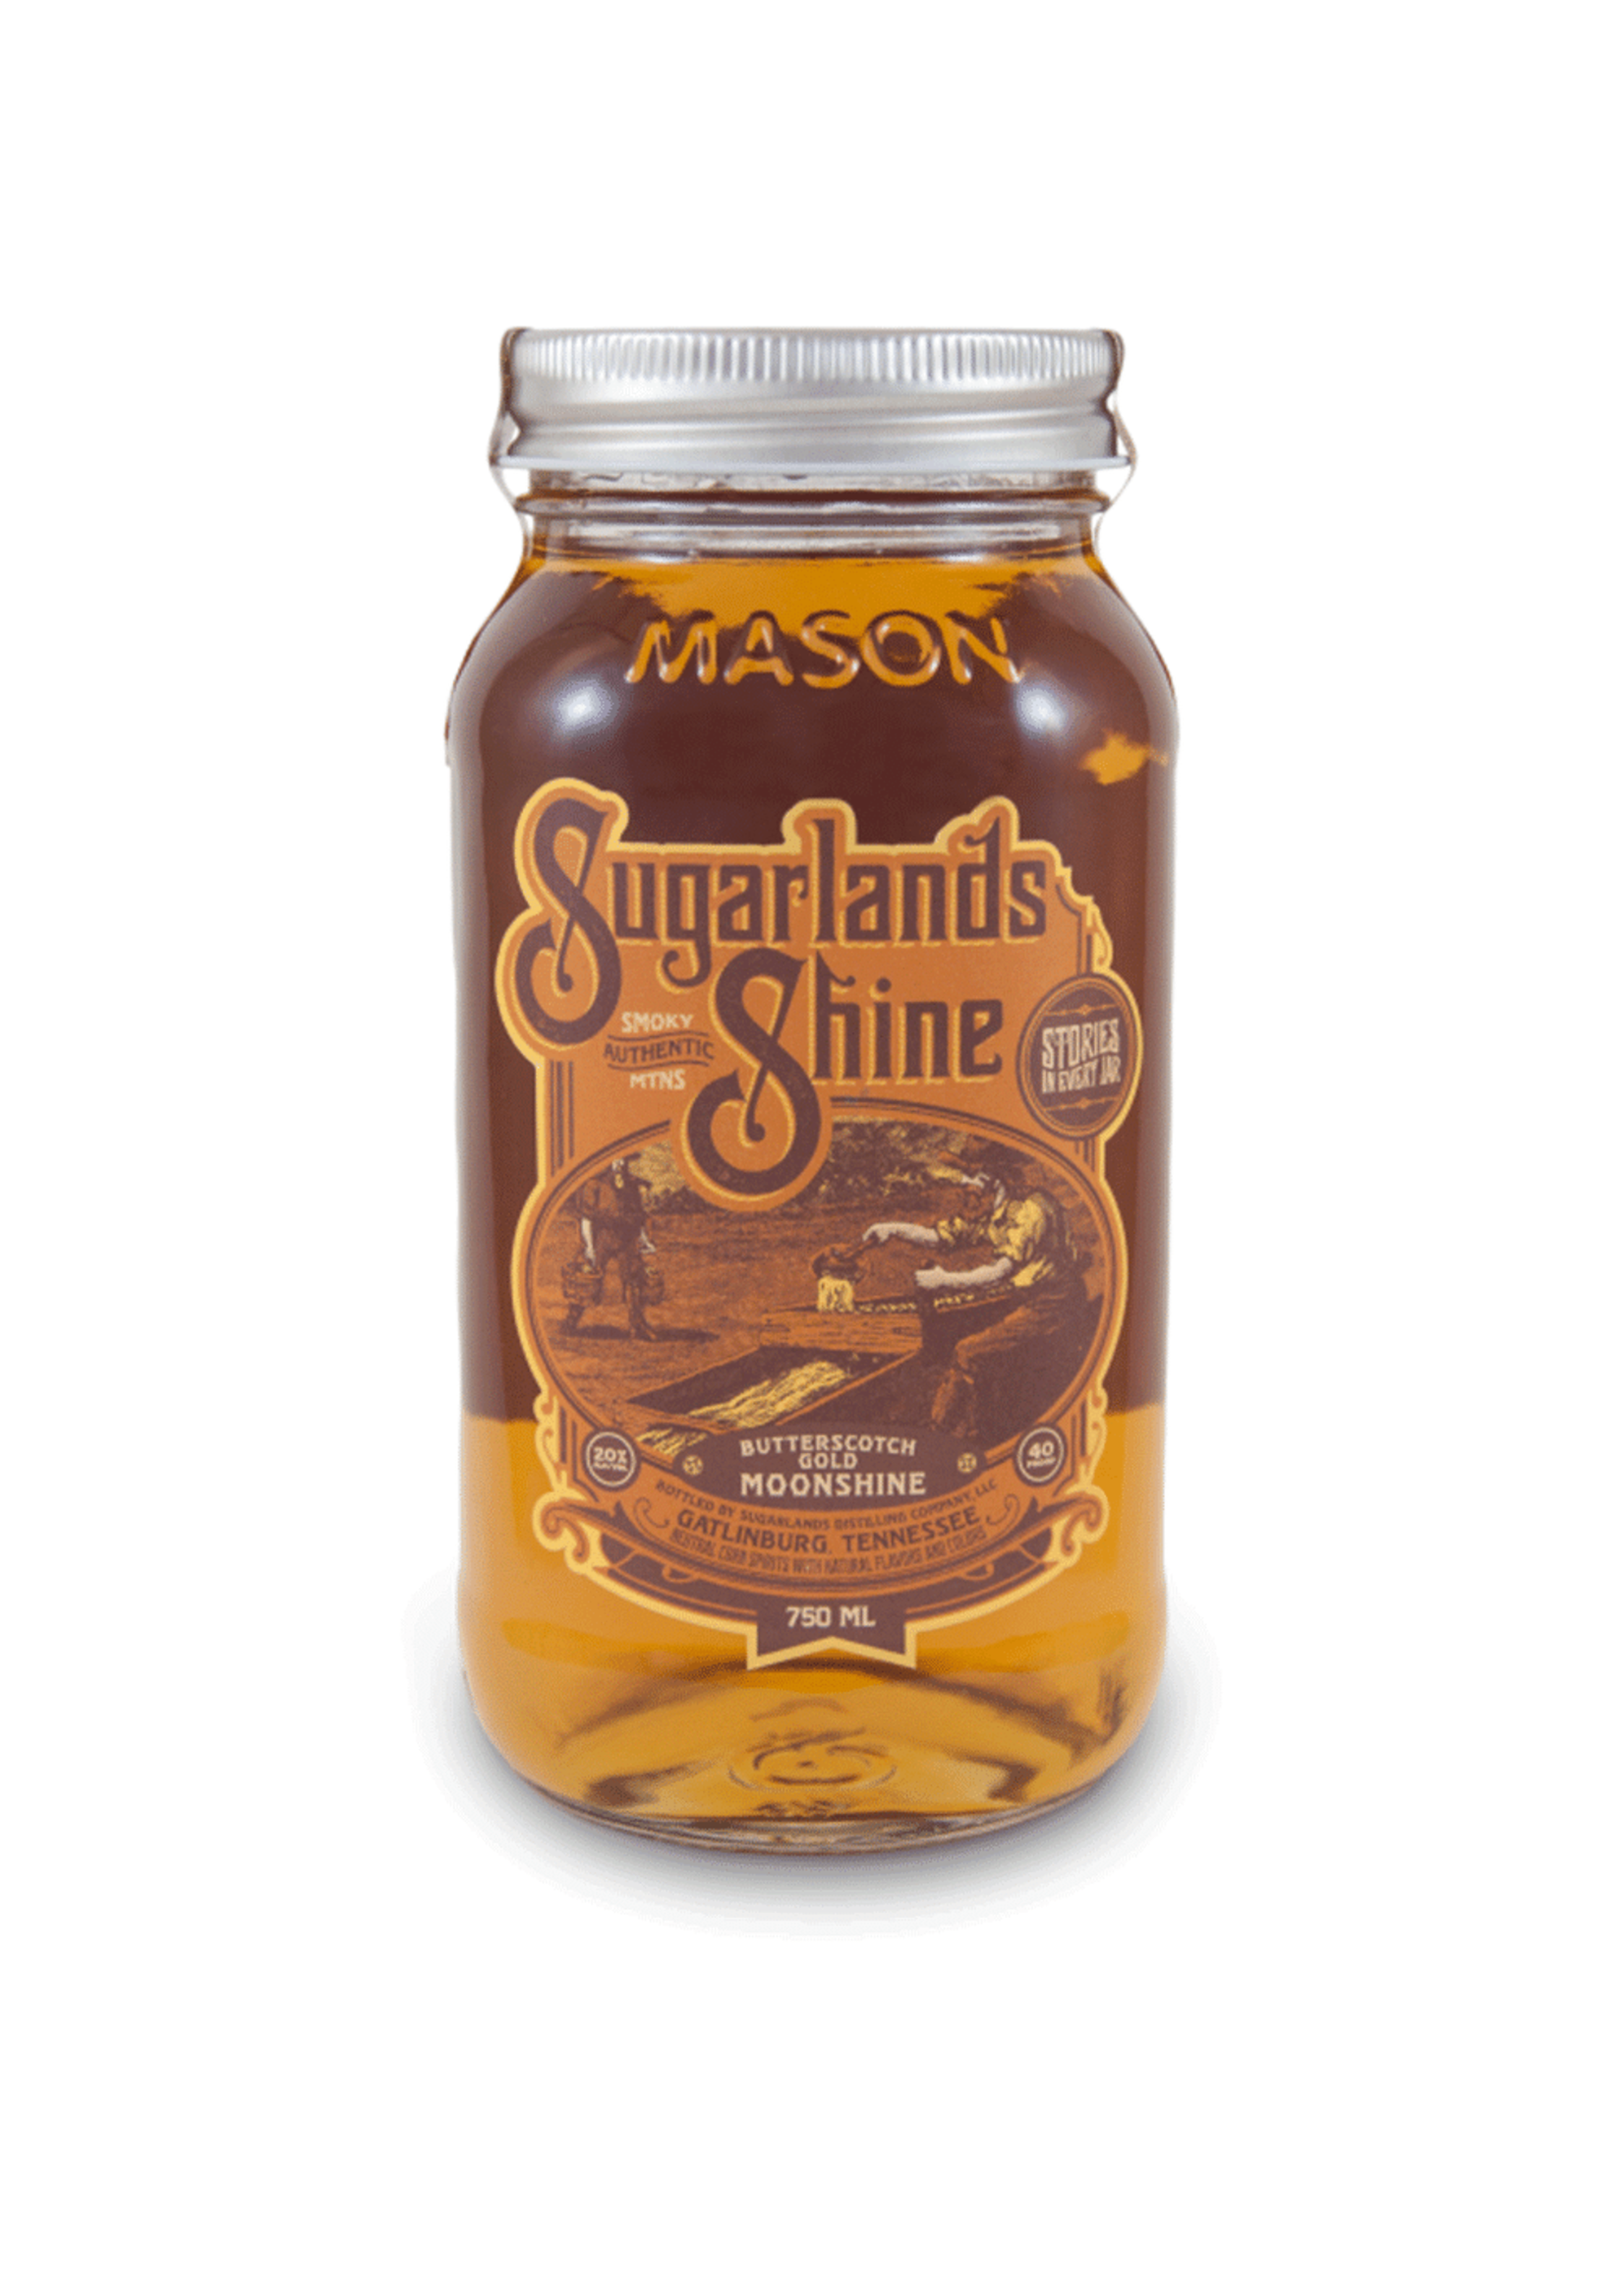 Sugarlands Moonshine & Sippin Cream Sugarlands Shine Butterscotch Gold 40Proof Jar 750ml